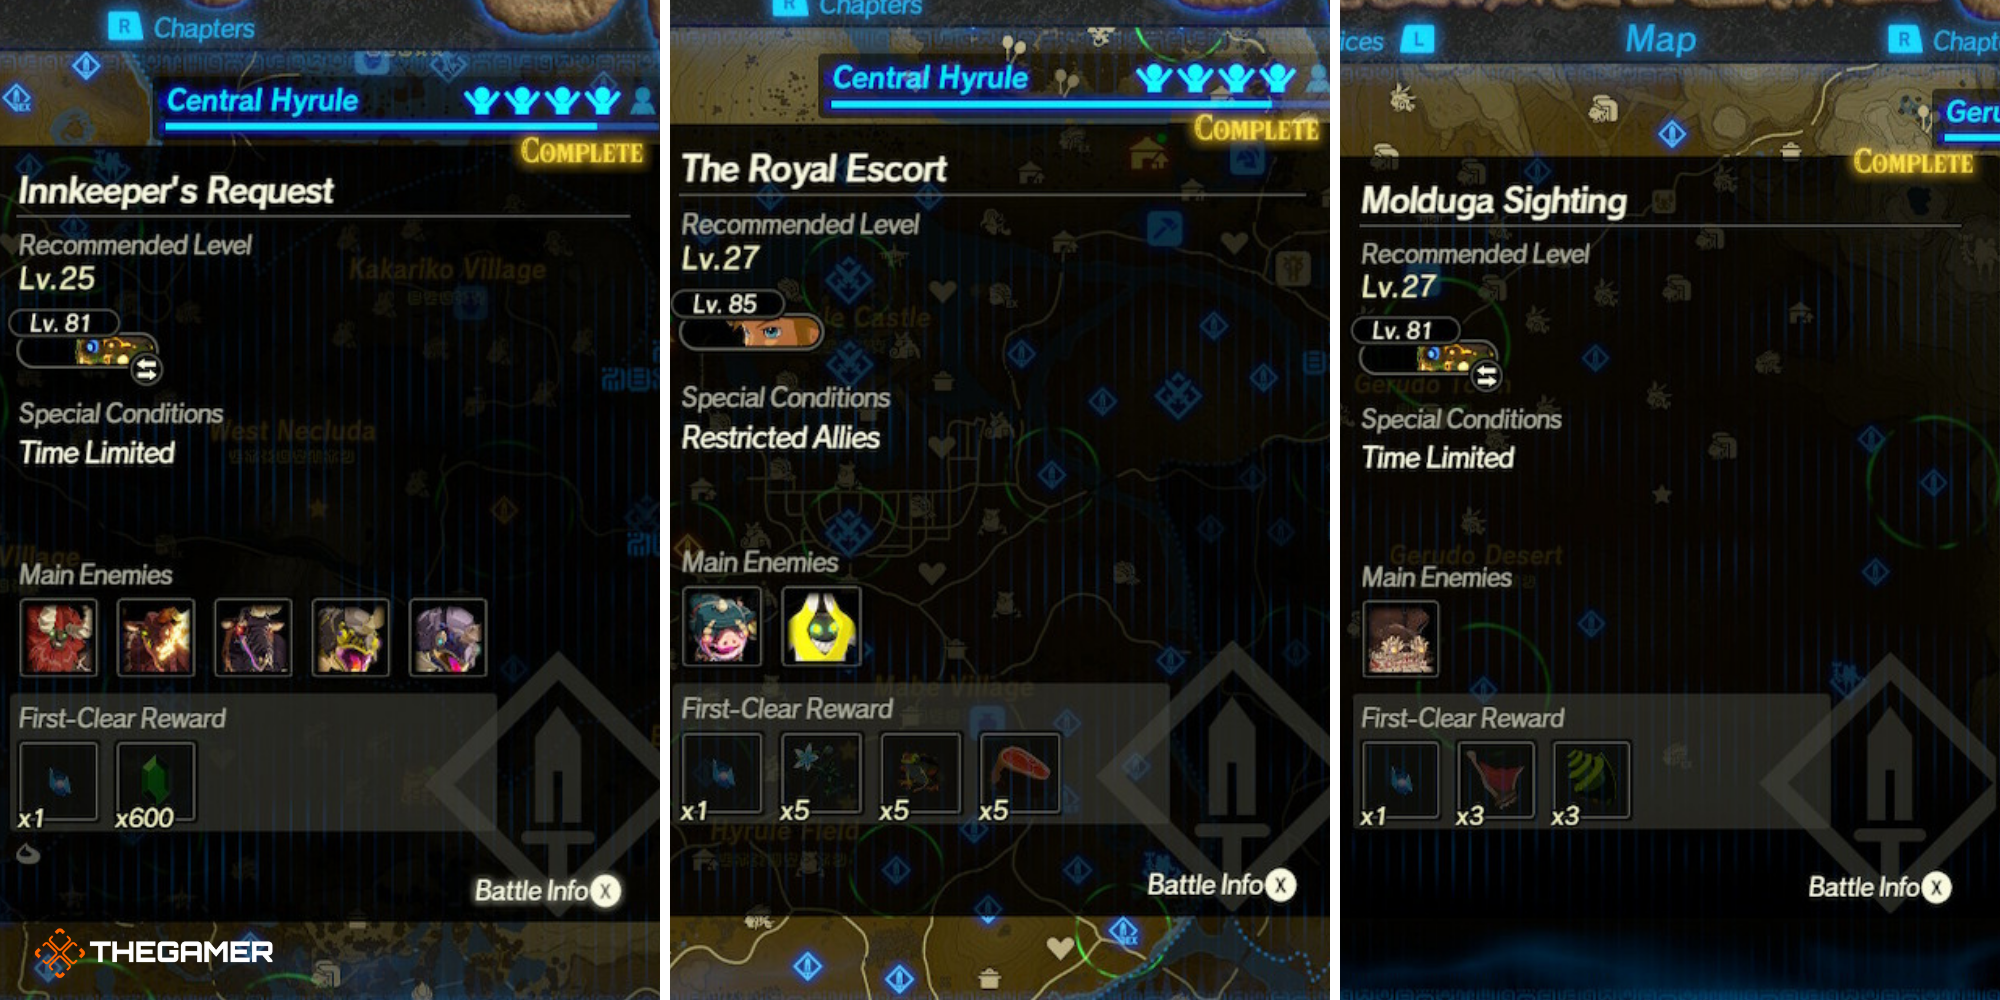 Age of Calamity, Split image of quests - Innkeeper's Request on left, The Royal Escort in centre, Molduga Sighting on right